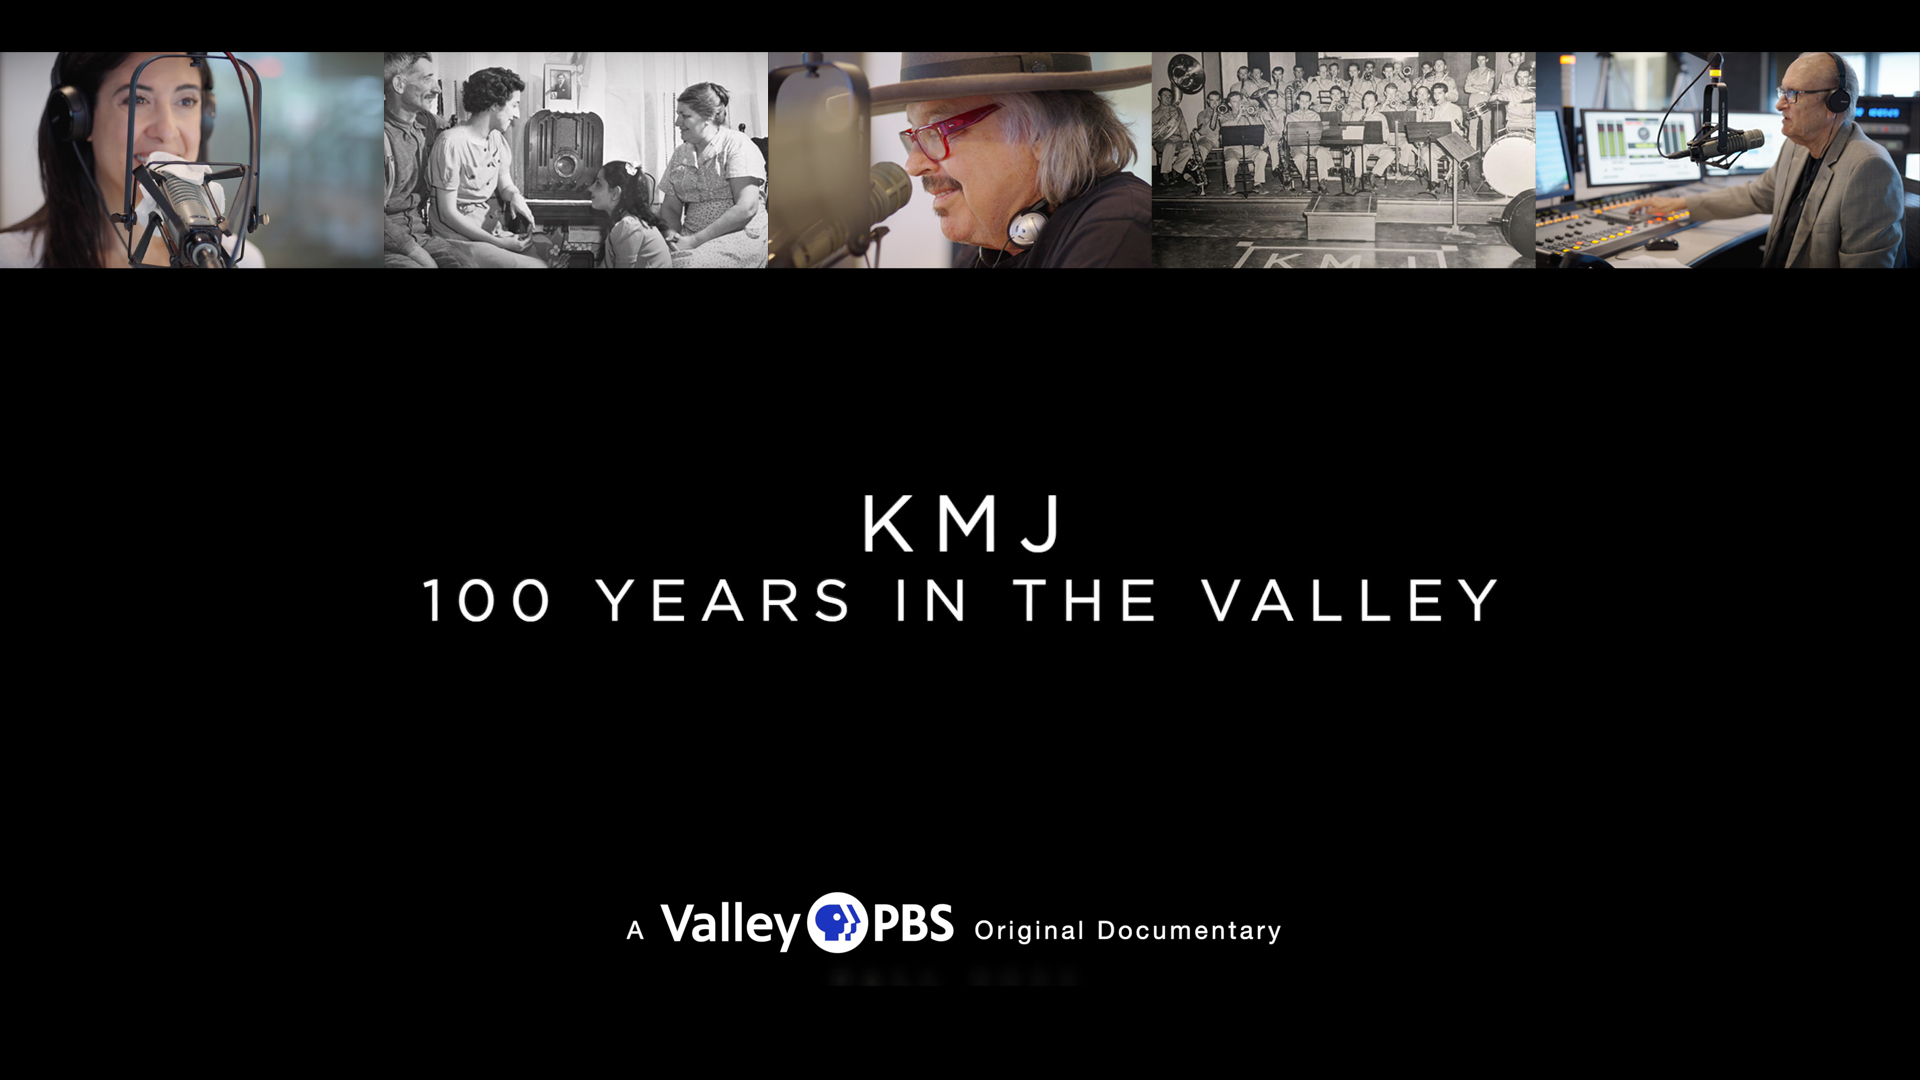 KMJ: 100 Years In the Valley